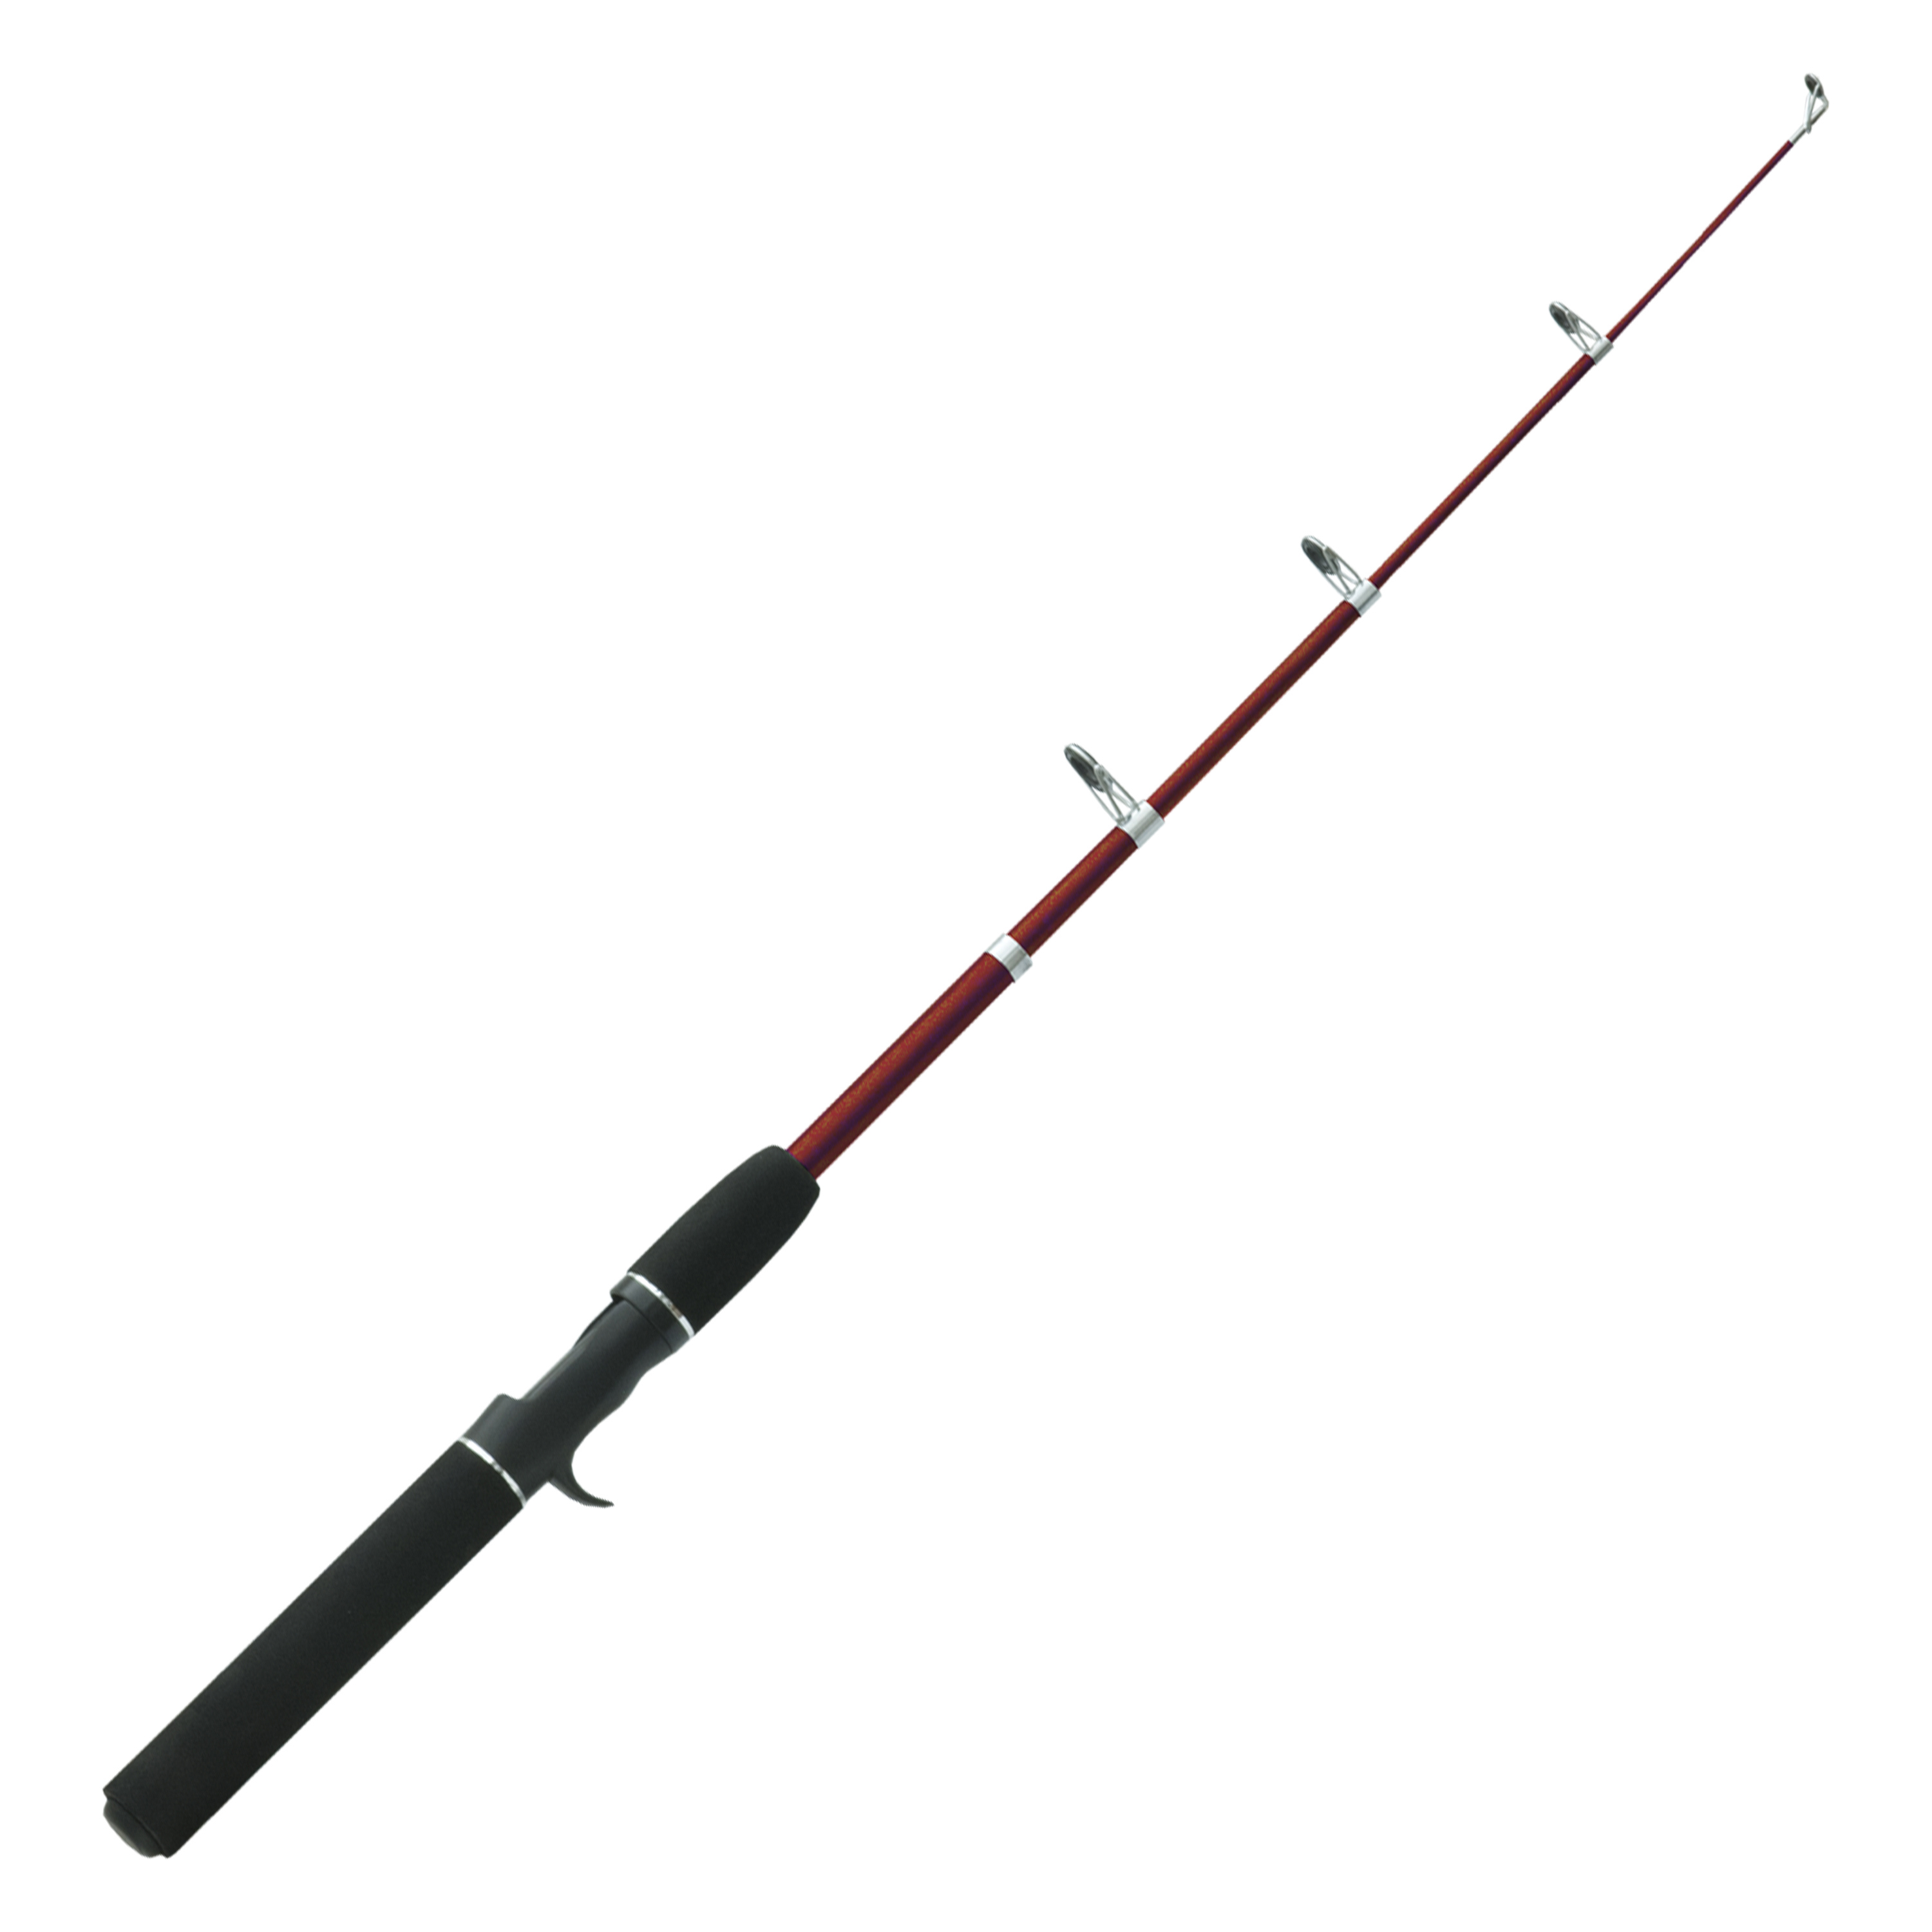 ONE PIECE ZB3701MH CRAPPIE ROD ZEBCO BULLET 7' COMBO 